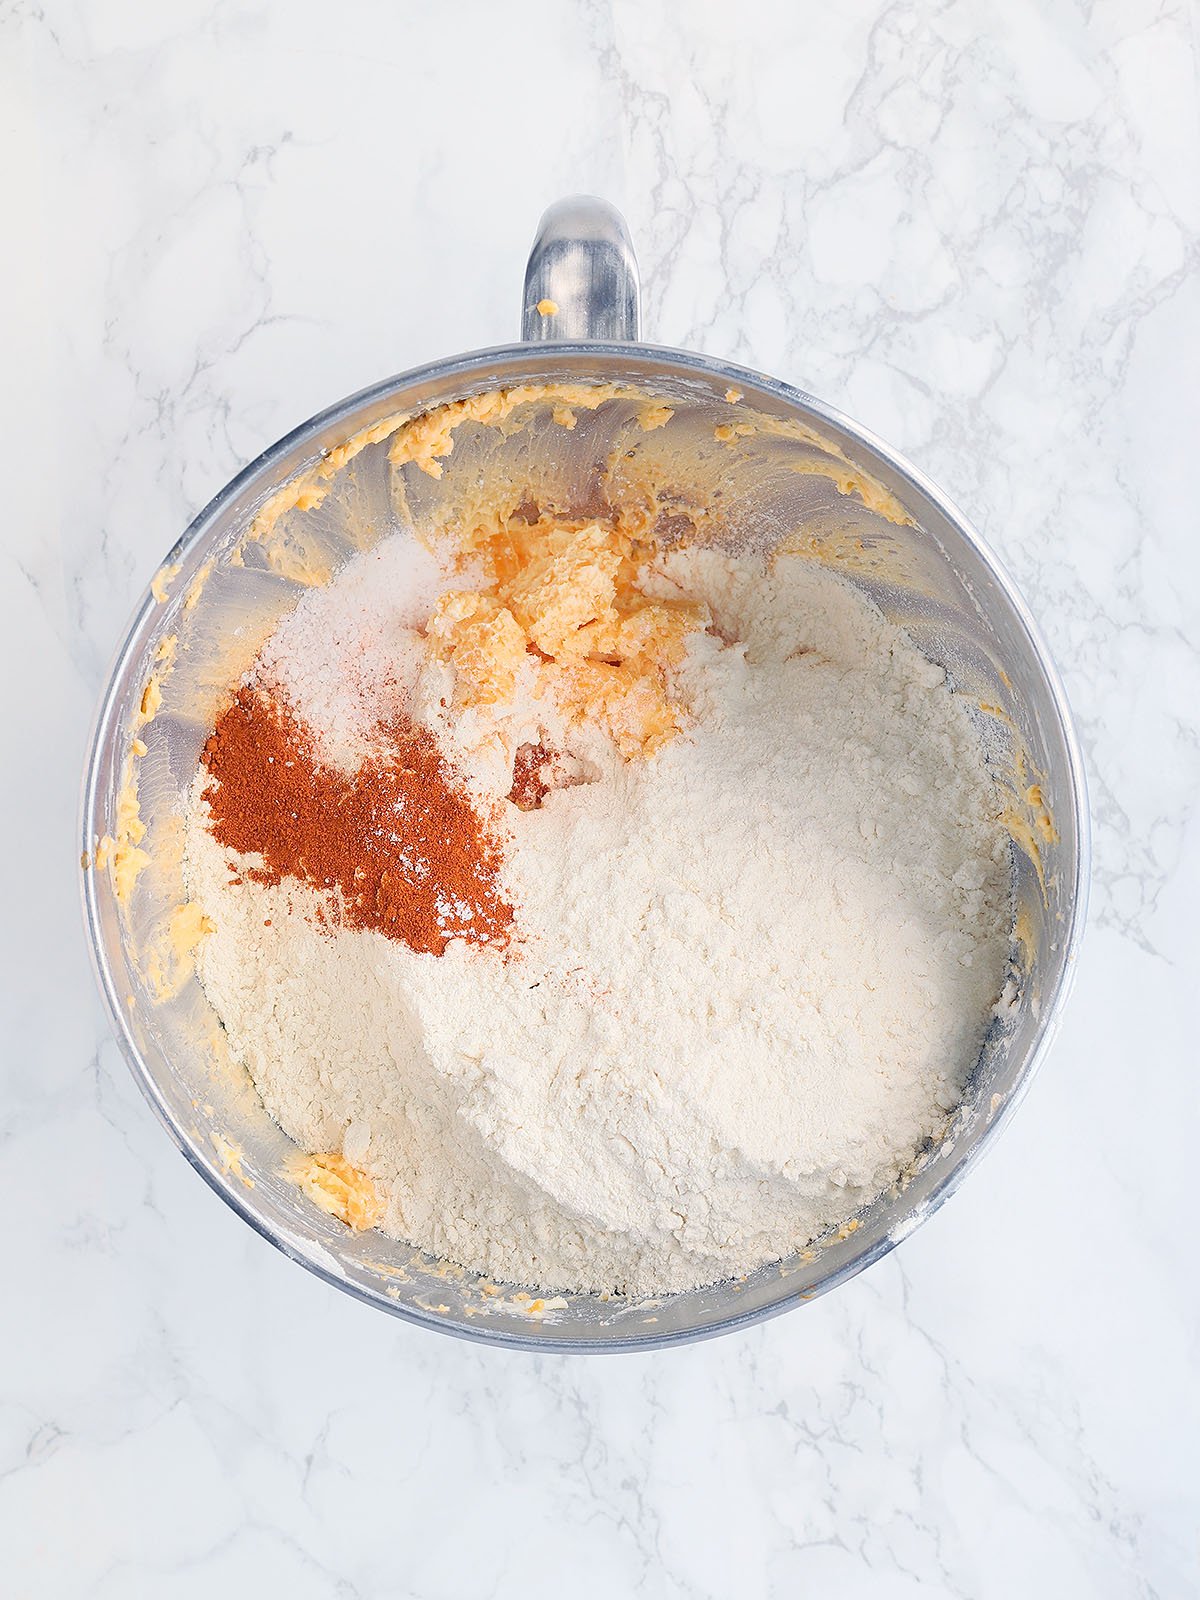 flour, salt and cayenne pepper added to the cheese mixture in a metal mixing bowl.